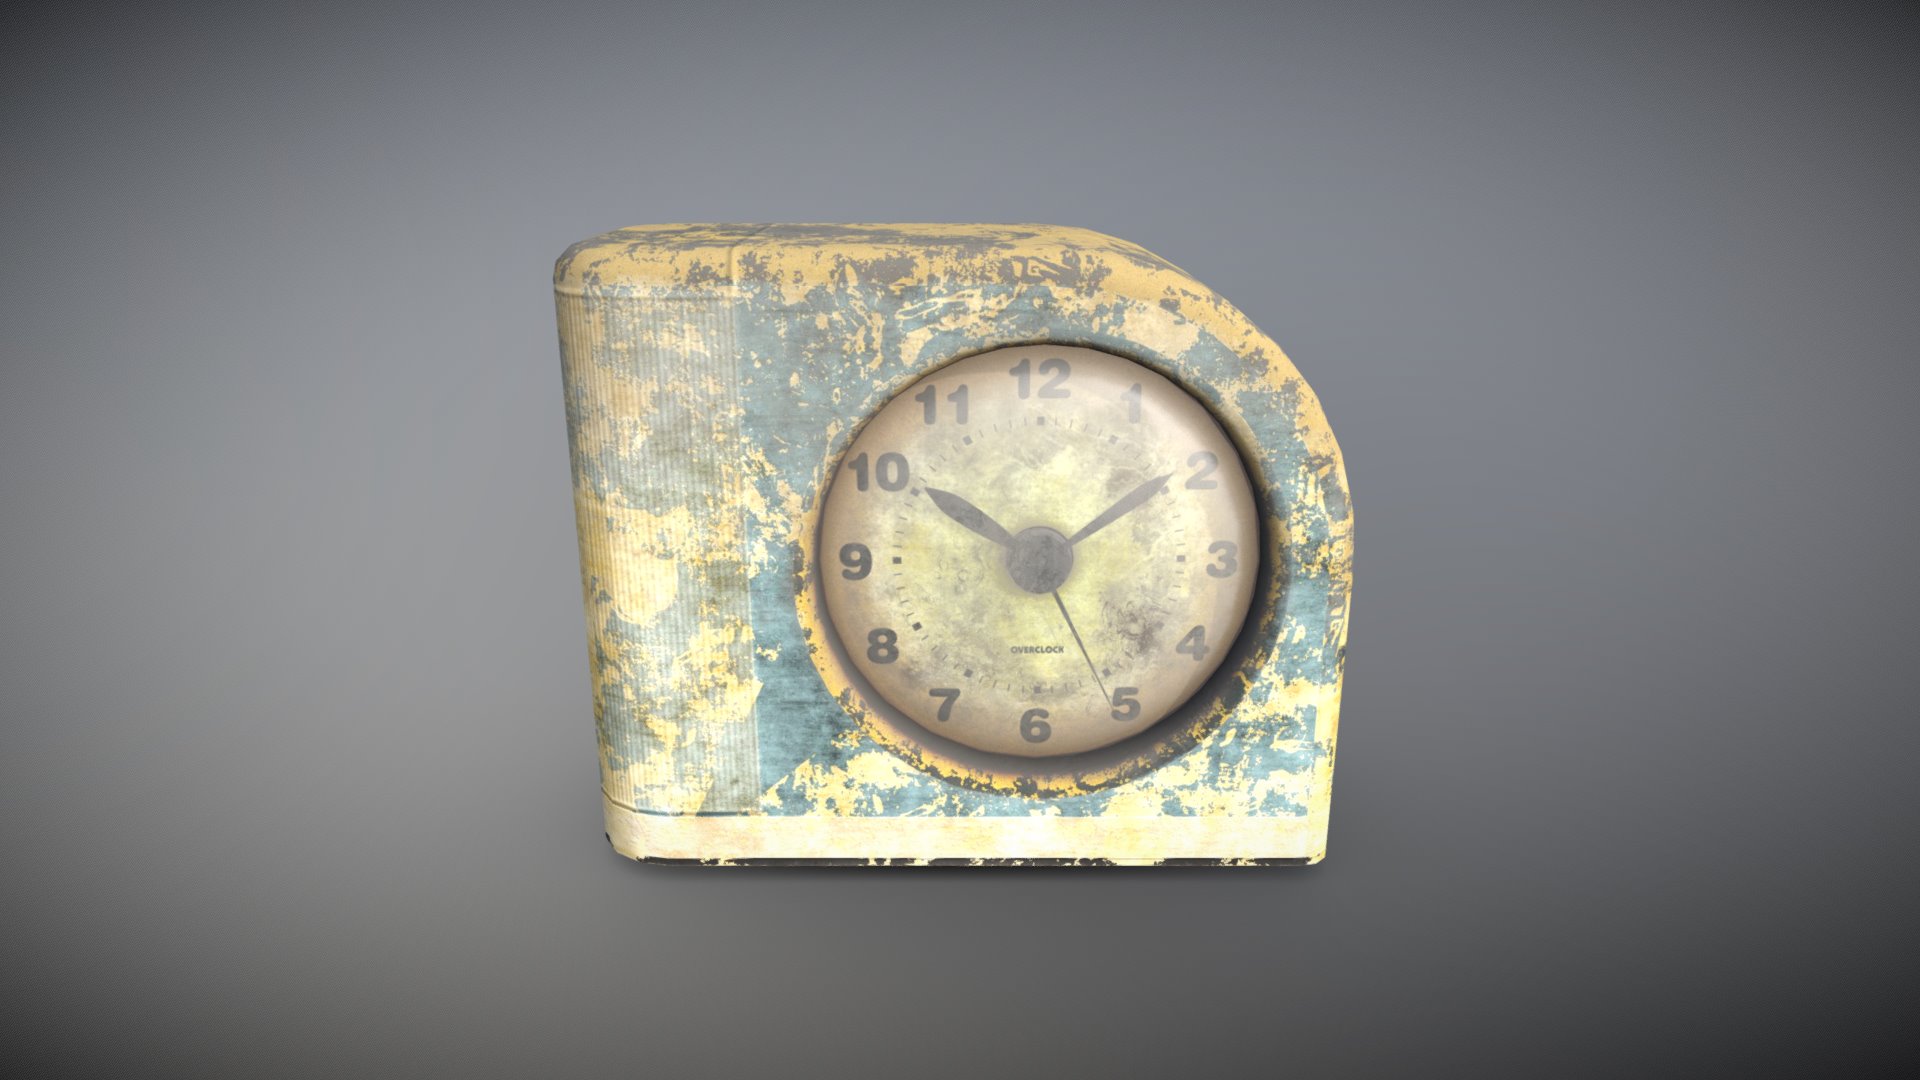 3D model Dirty desktop clock 14 of 20 - This is a 3D model of the Dirty desktop clock 14 of 20. The 3D model is about a clock on a wall.